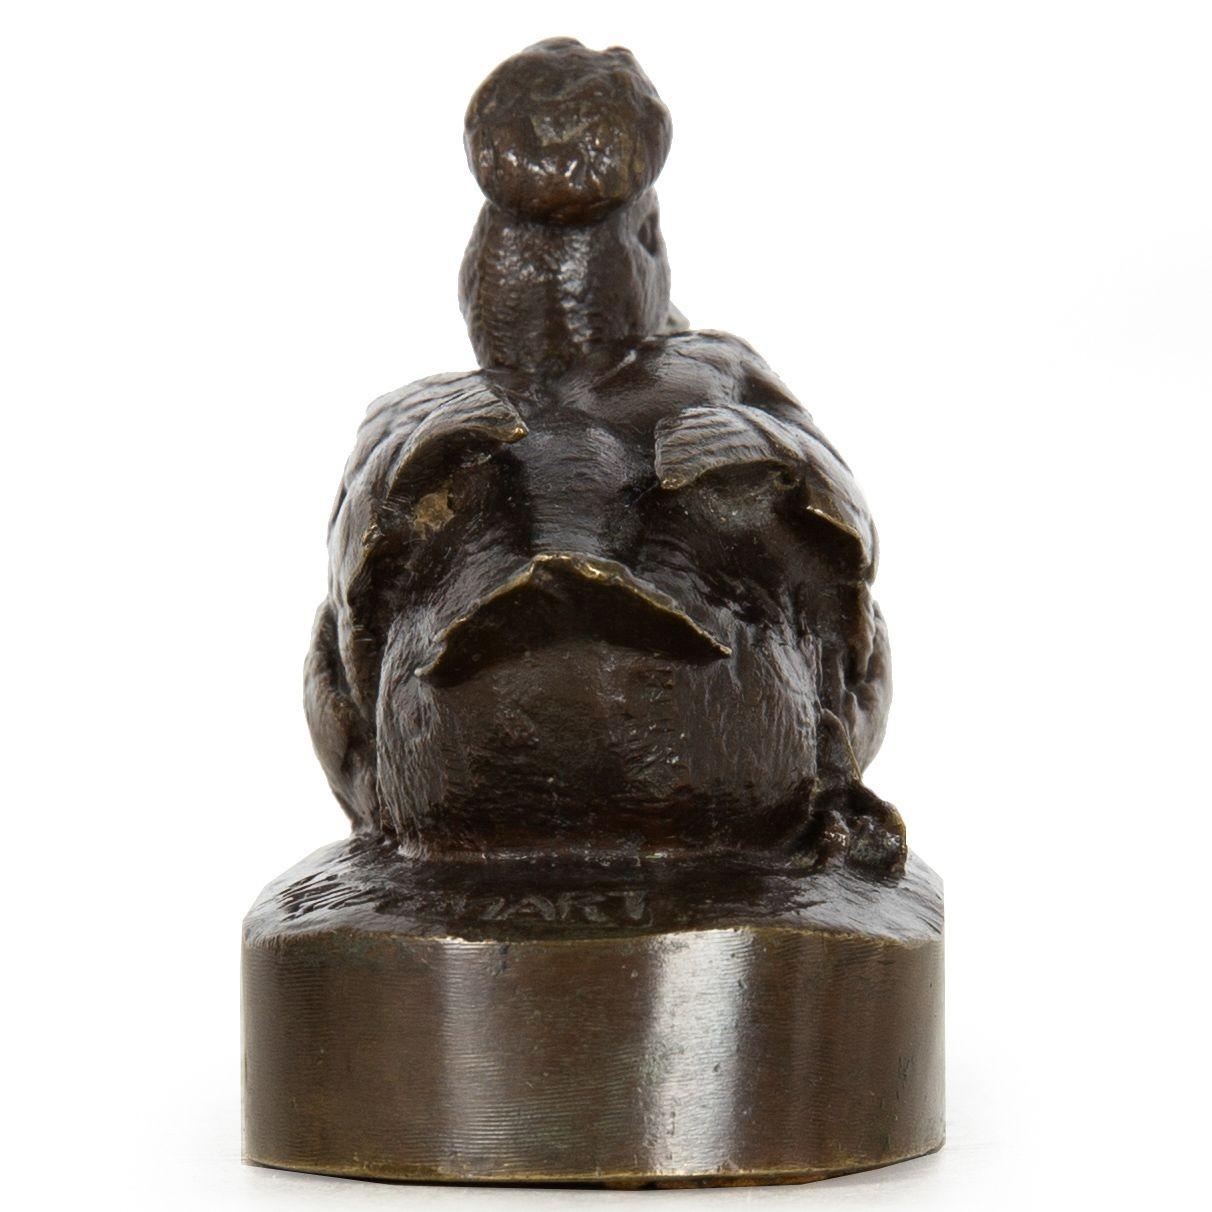 19th Century Rare French Bronze Sculpture “Crested Duck” by Henri Alfred Jacquemart For Sale